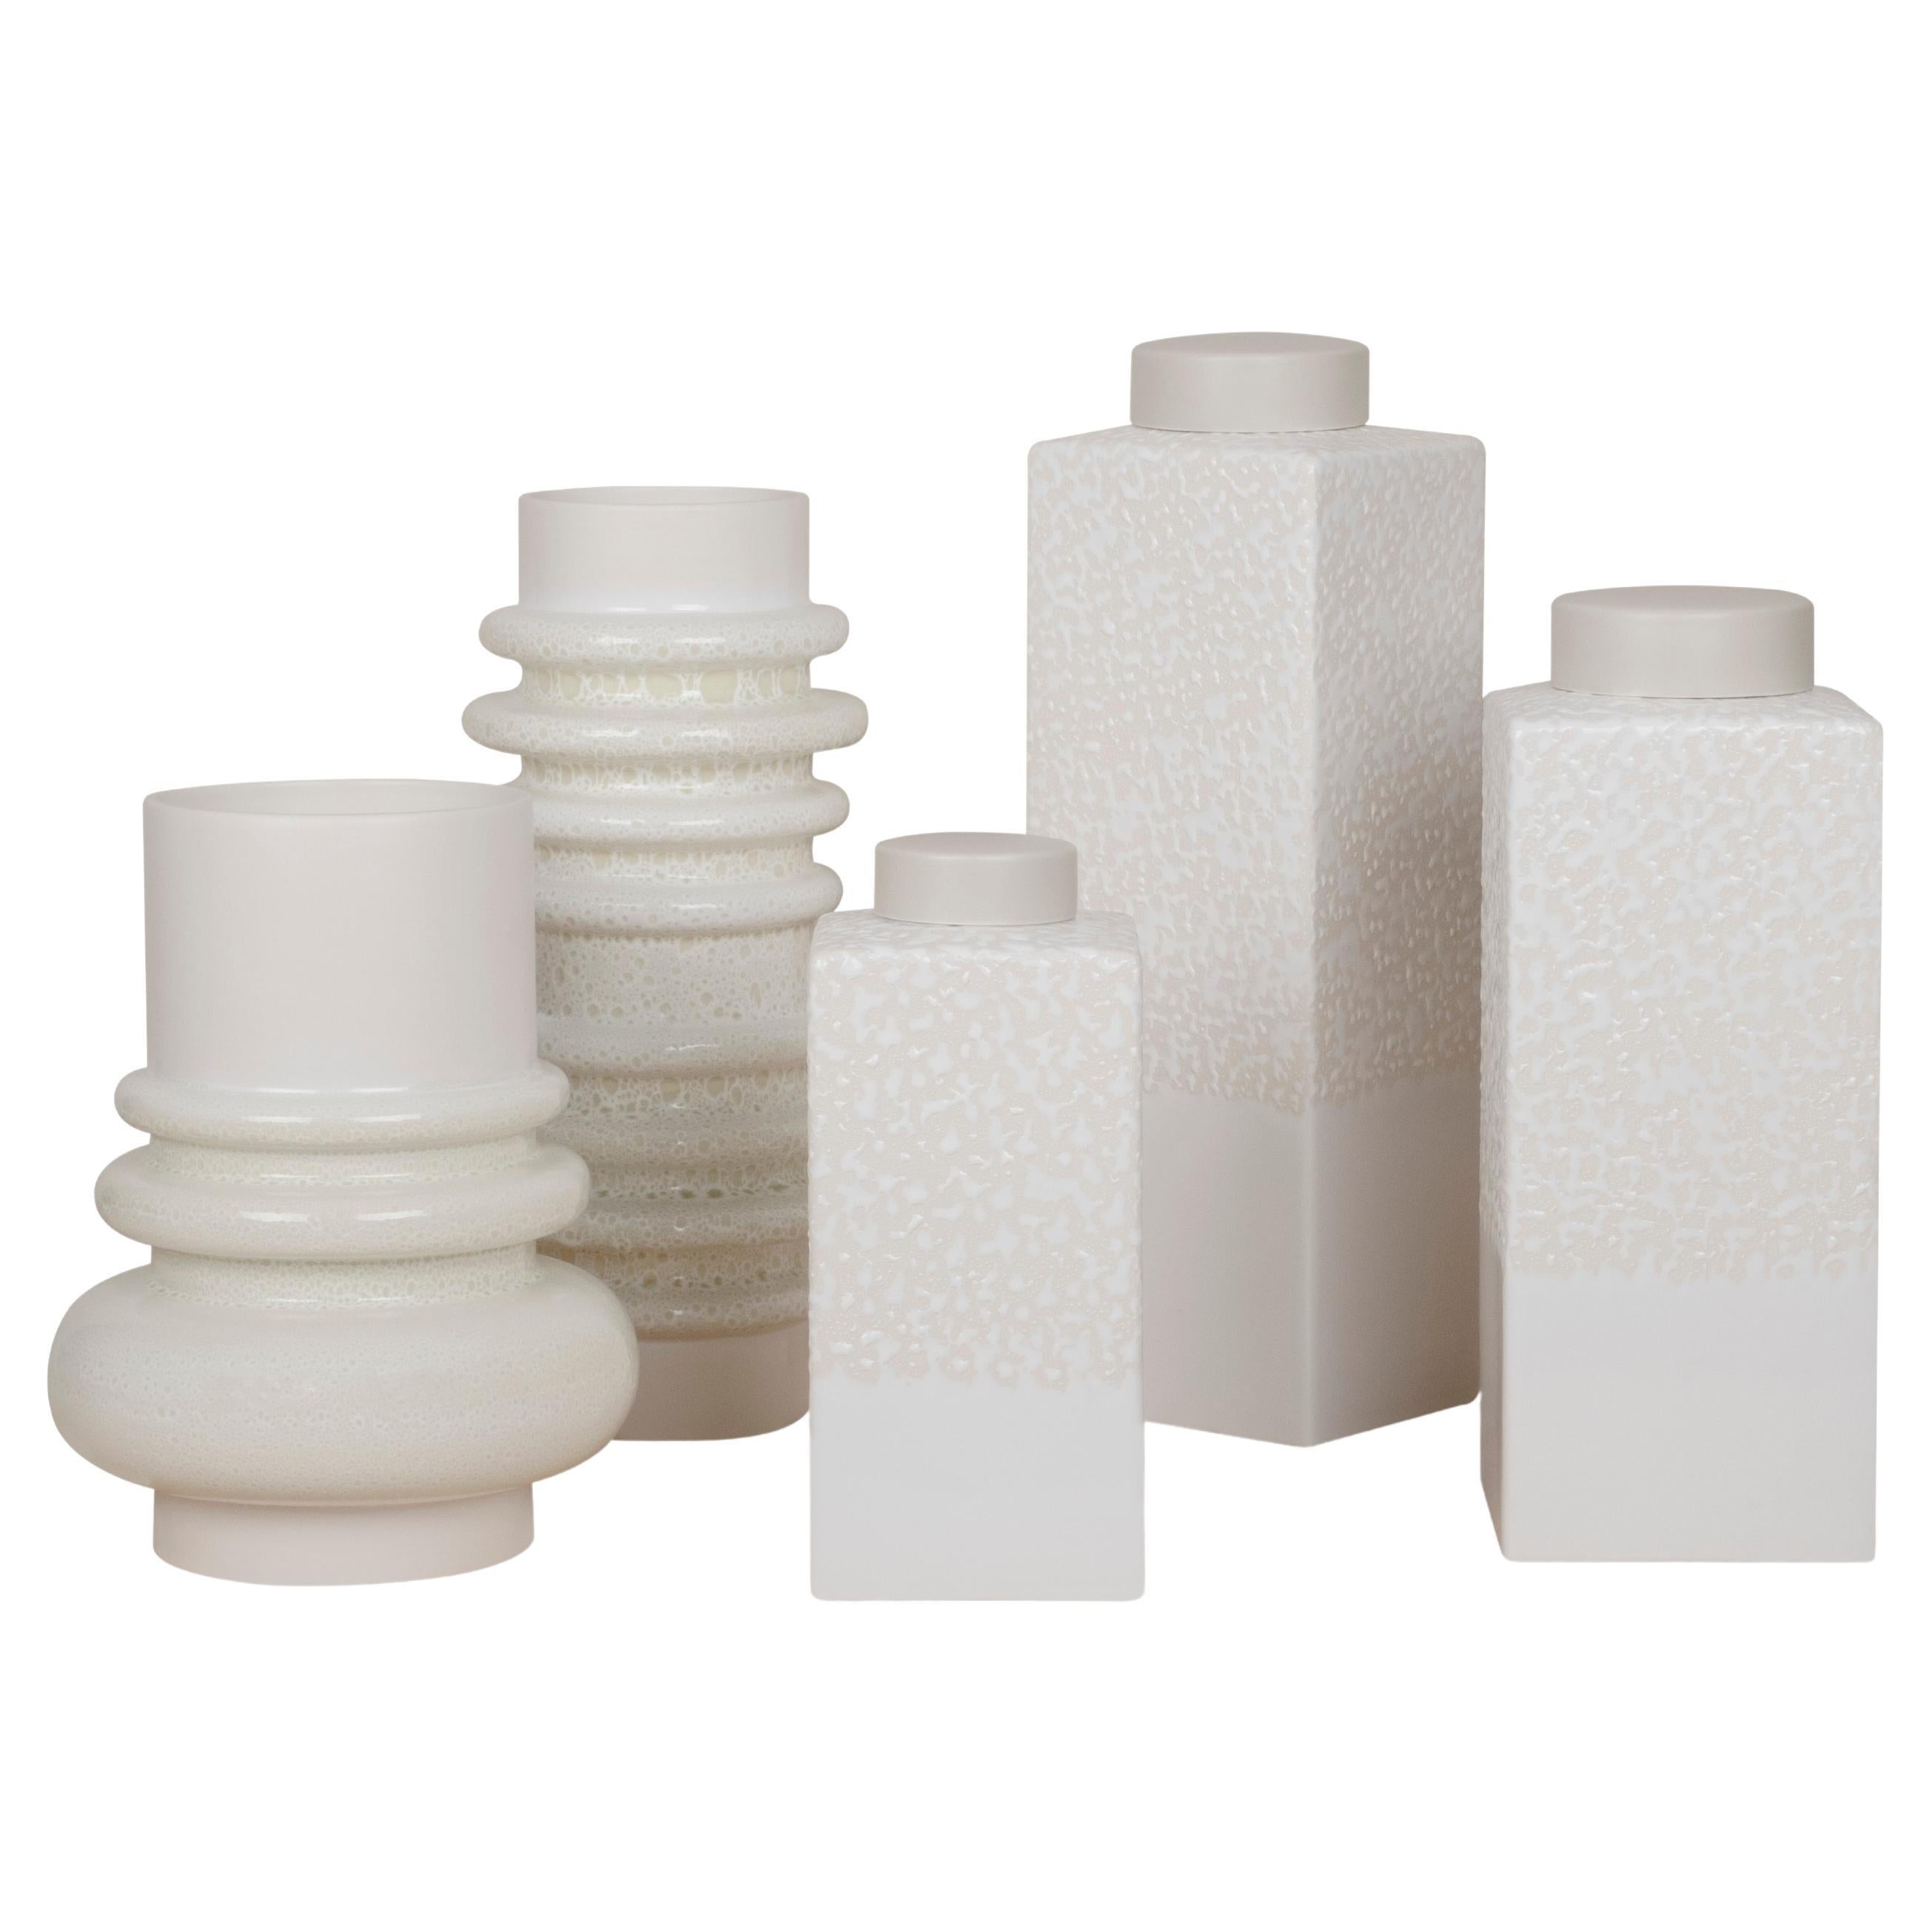 Set/5 Ceramic Pots, White, Handmade in Portugal by Lusitanus Home For Sale